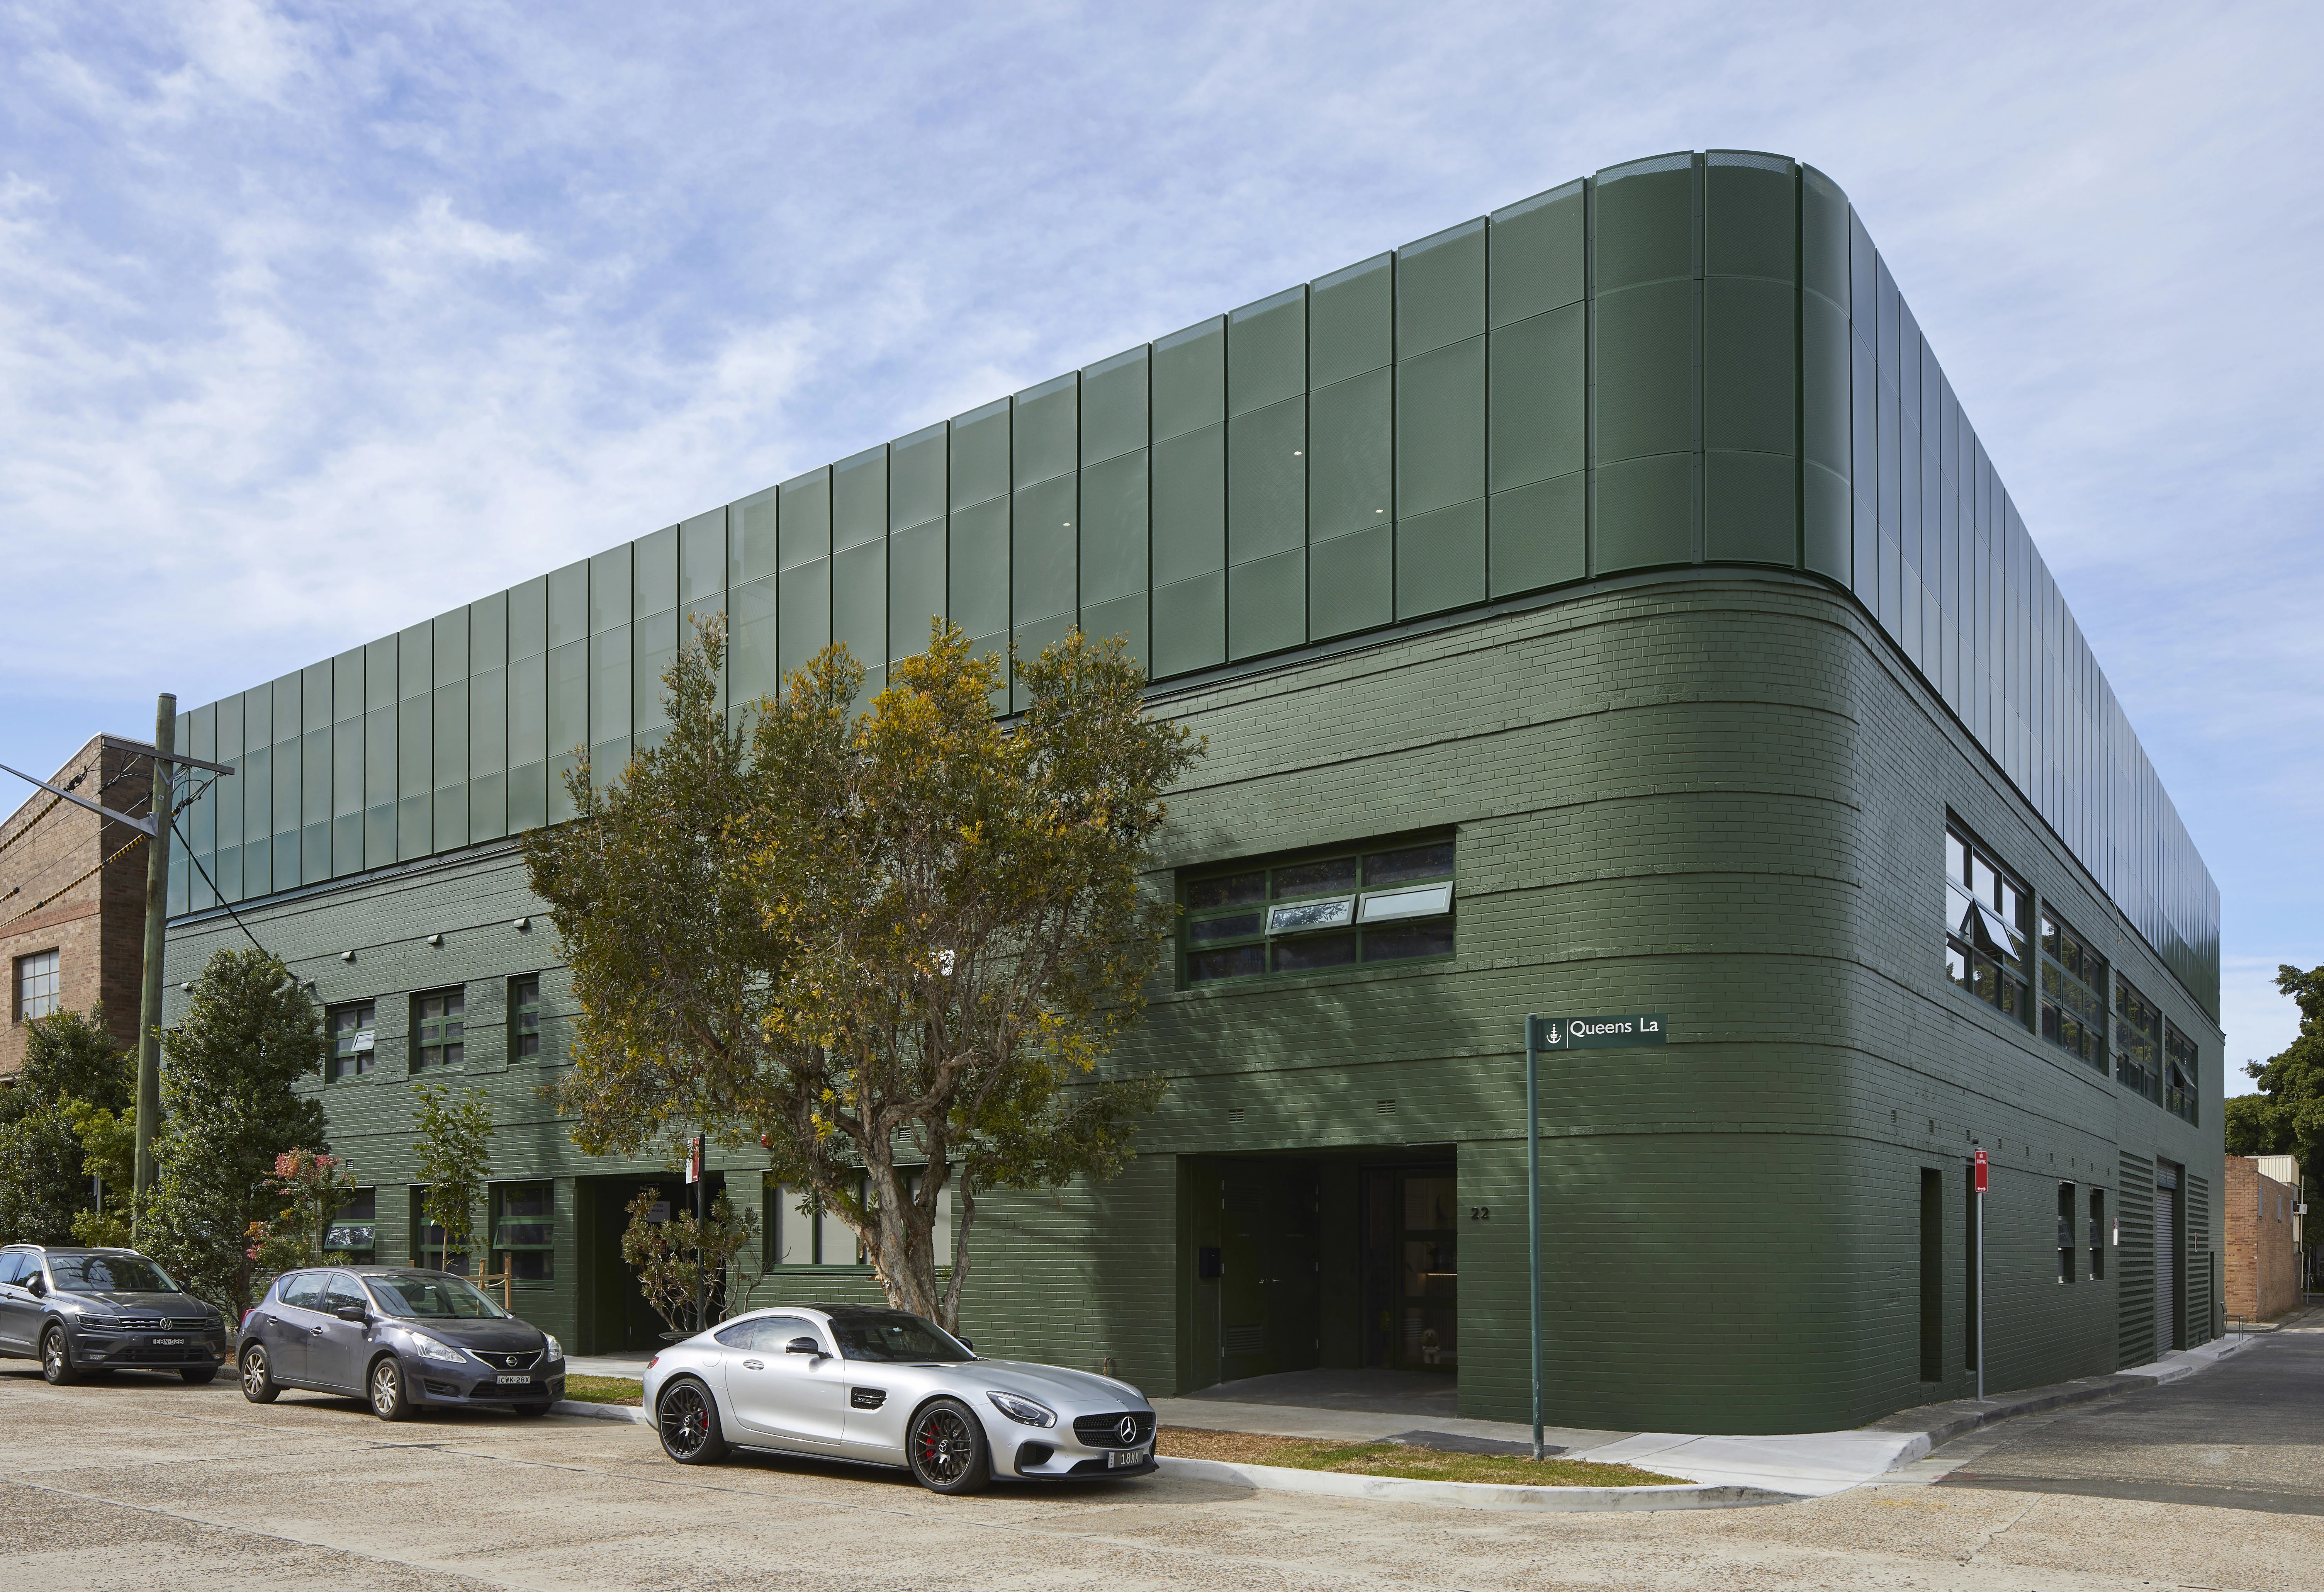 Large commercial building with rounded corner painted green. Dulux Colour Award winner for 2021.